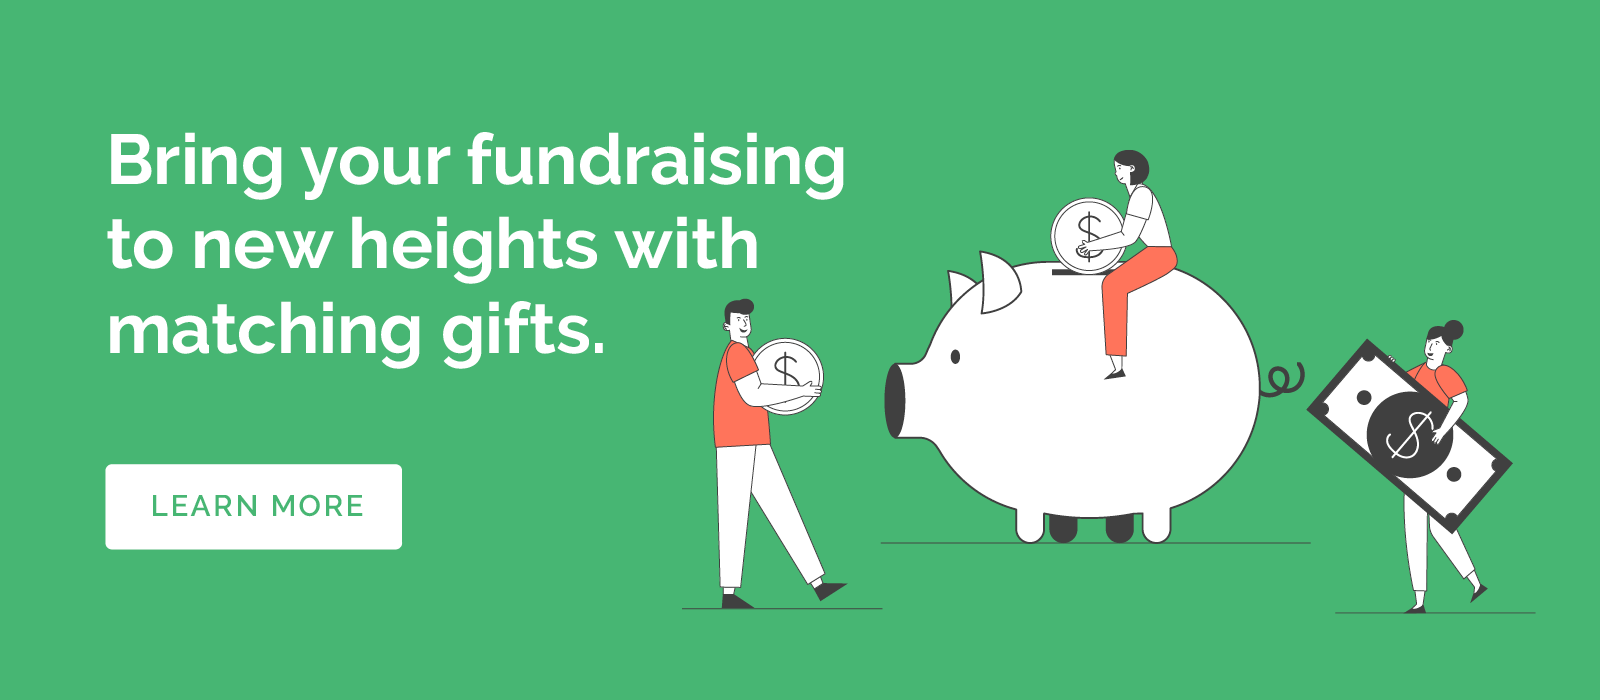 Bring your crowdfunding to new heights with matching gifts.